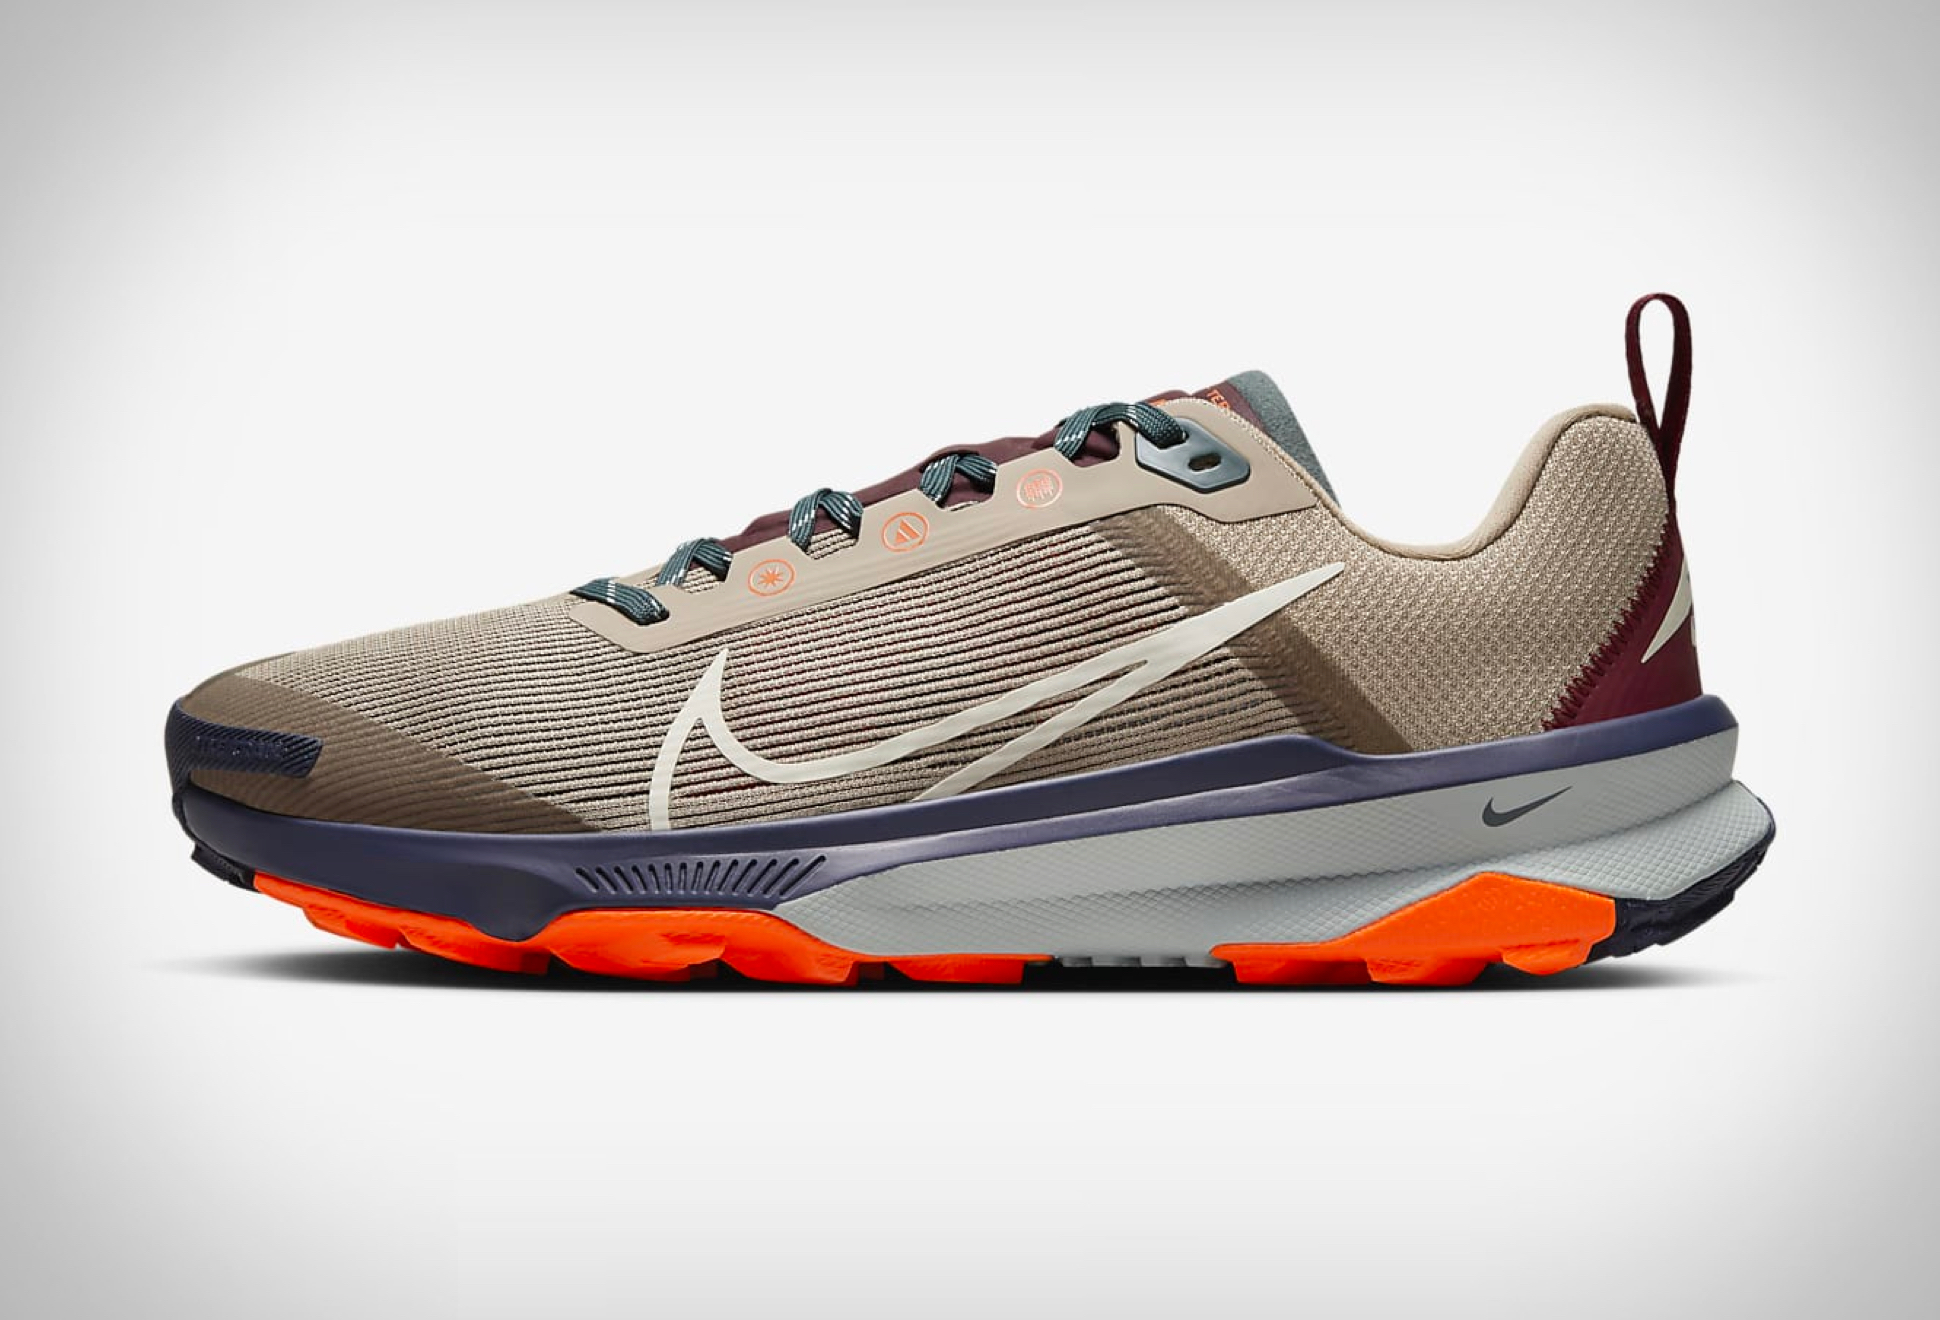 Nike Kiger 9 Trail Running Shoes | Image